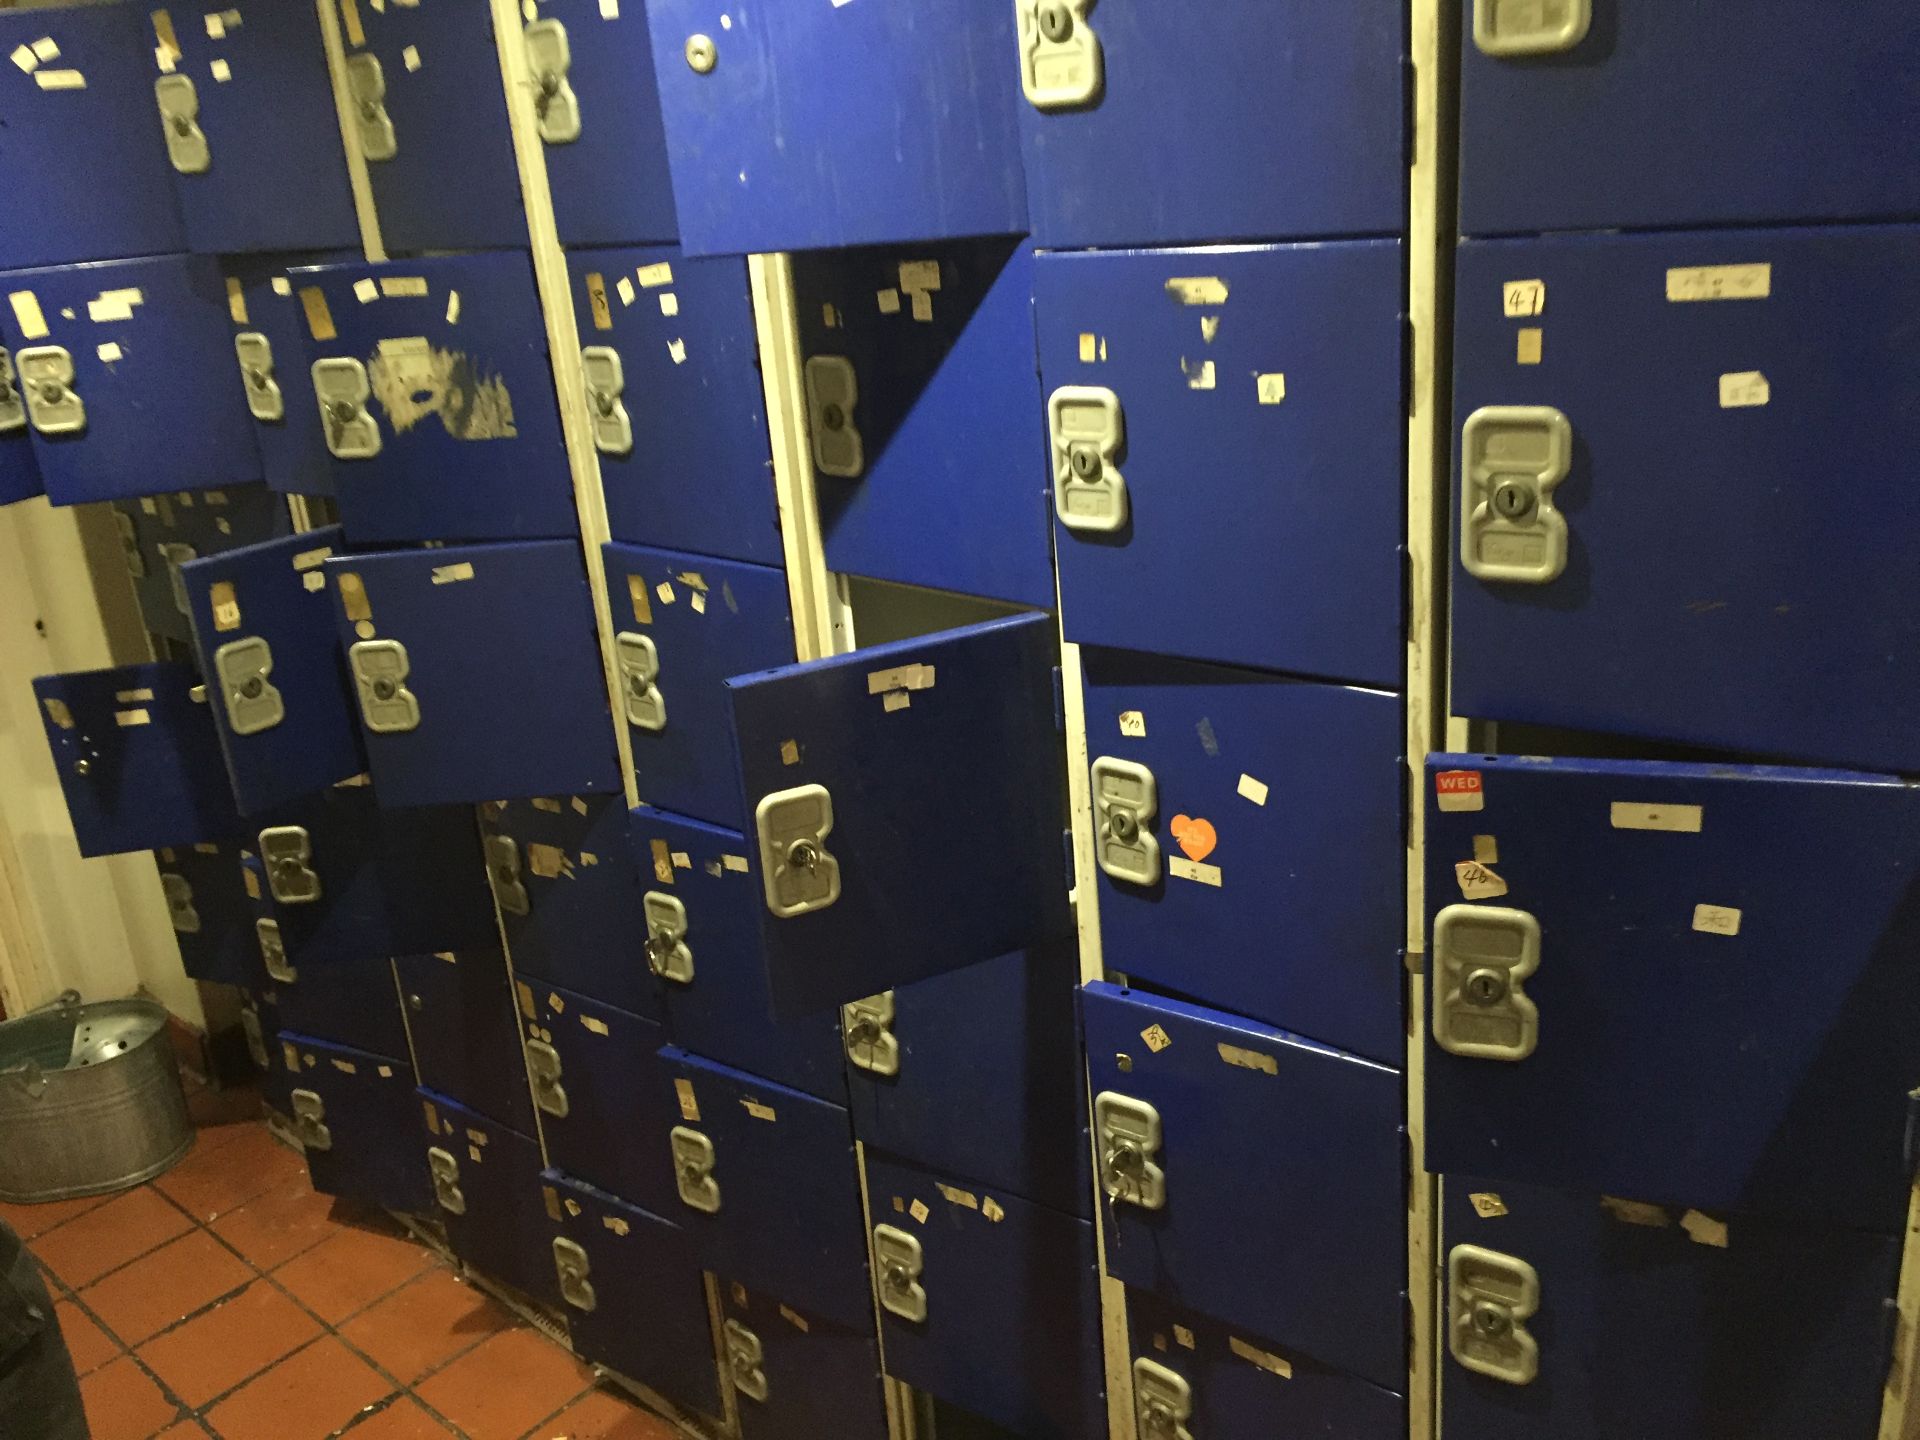 Job Lot of 8 x Storage Lockers each with 6 doors per unit, please note most have keys missing - - Image 3 of 3